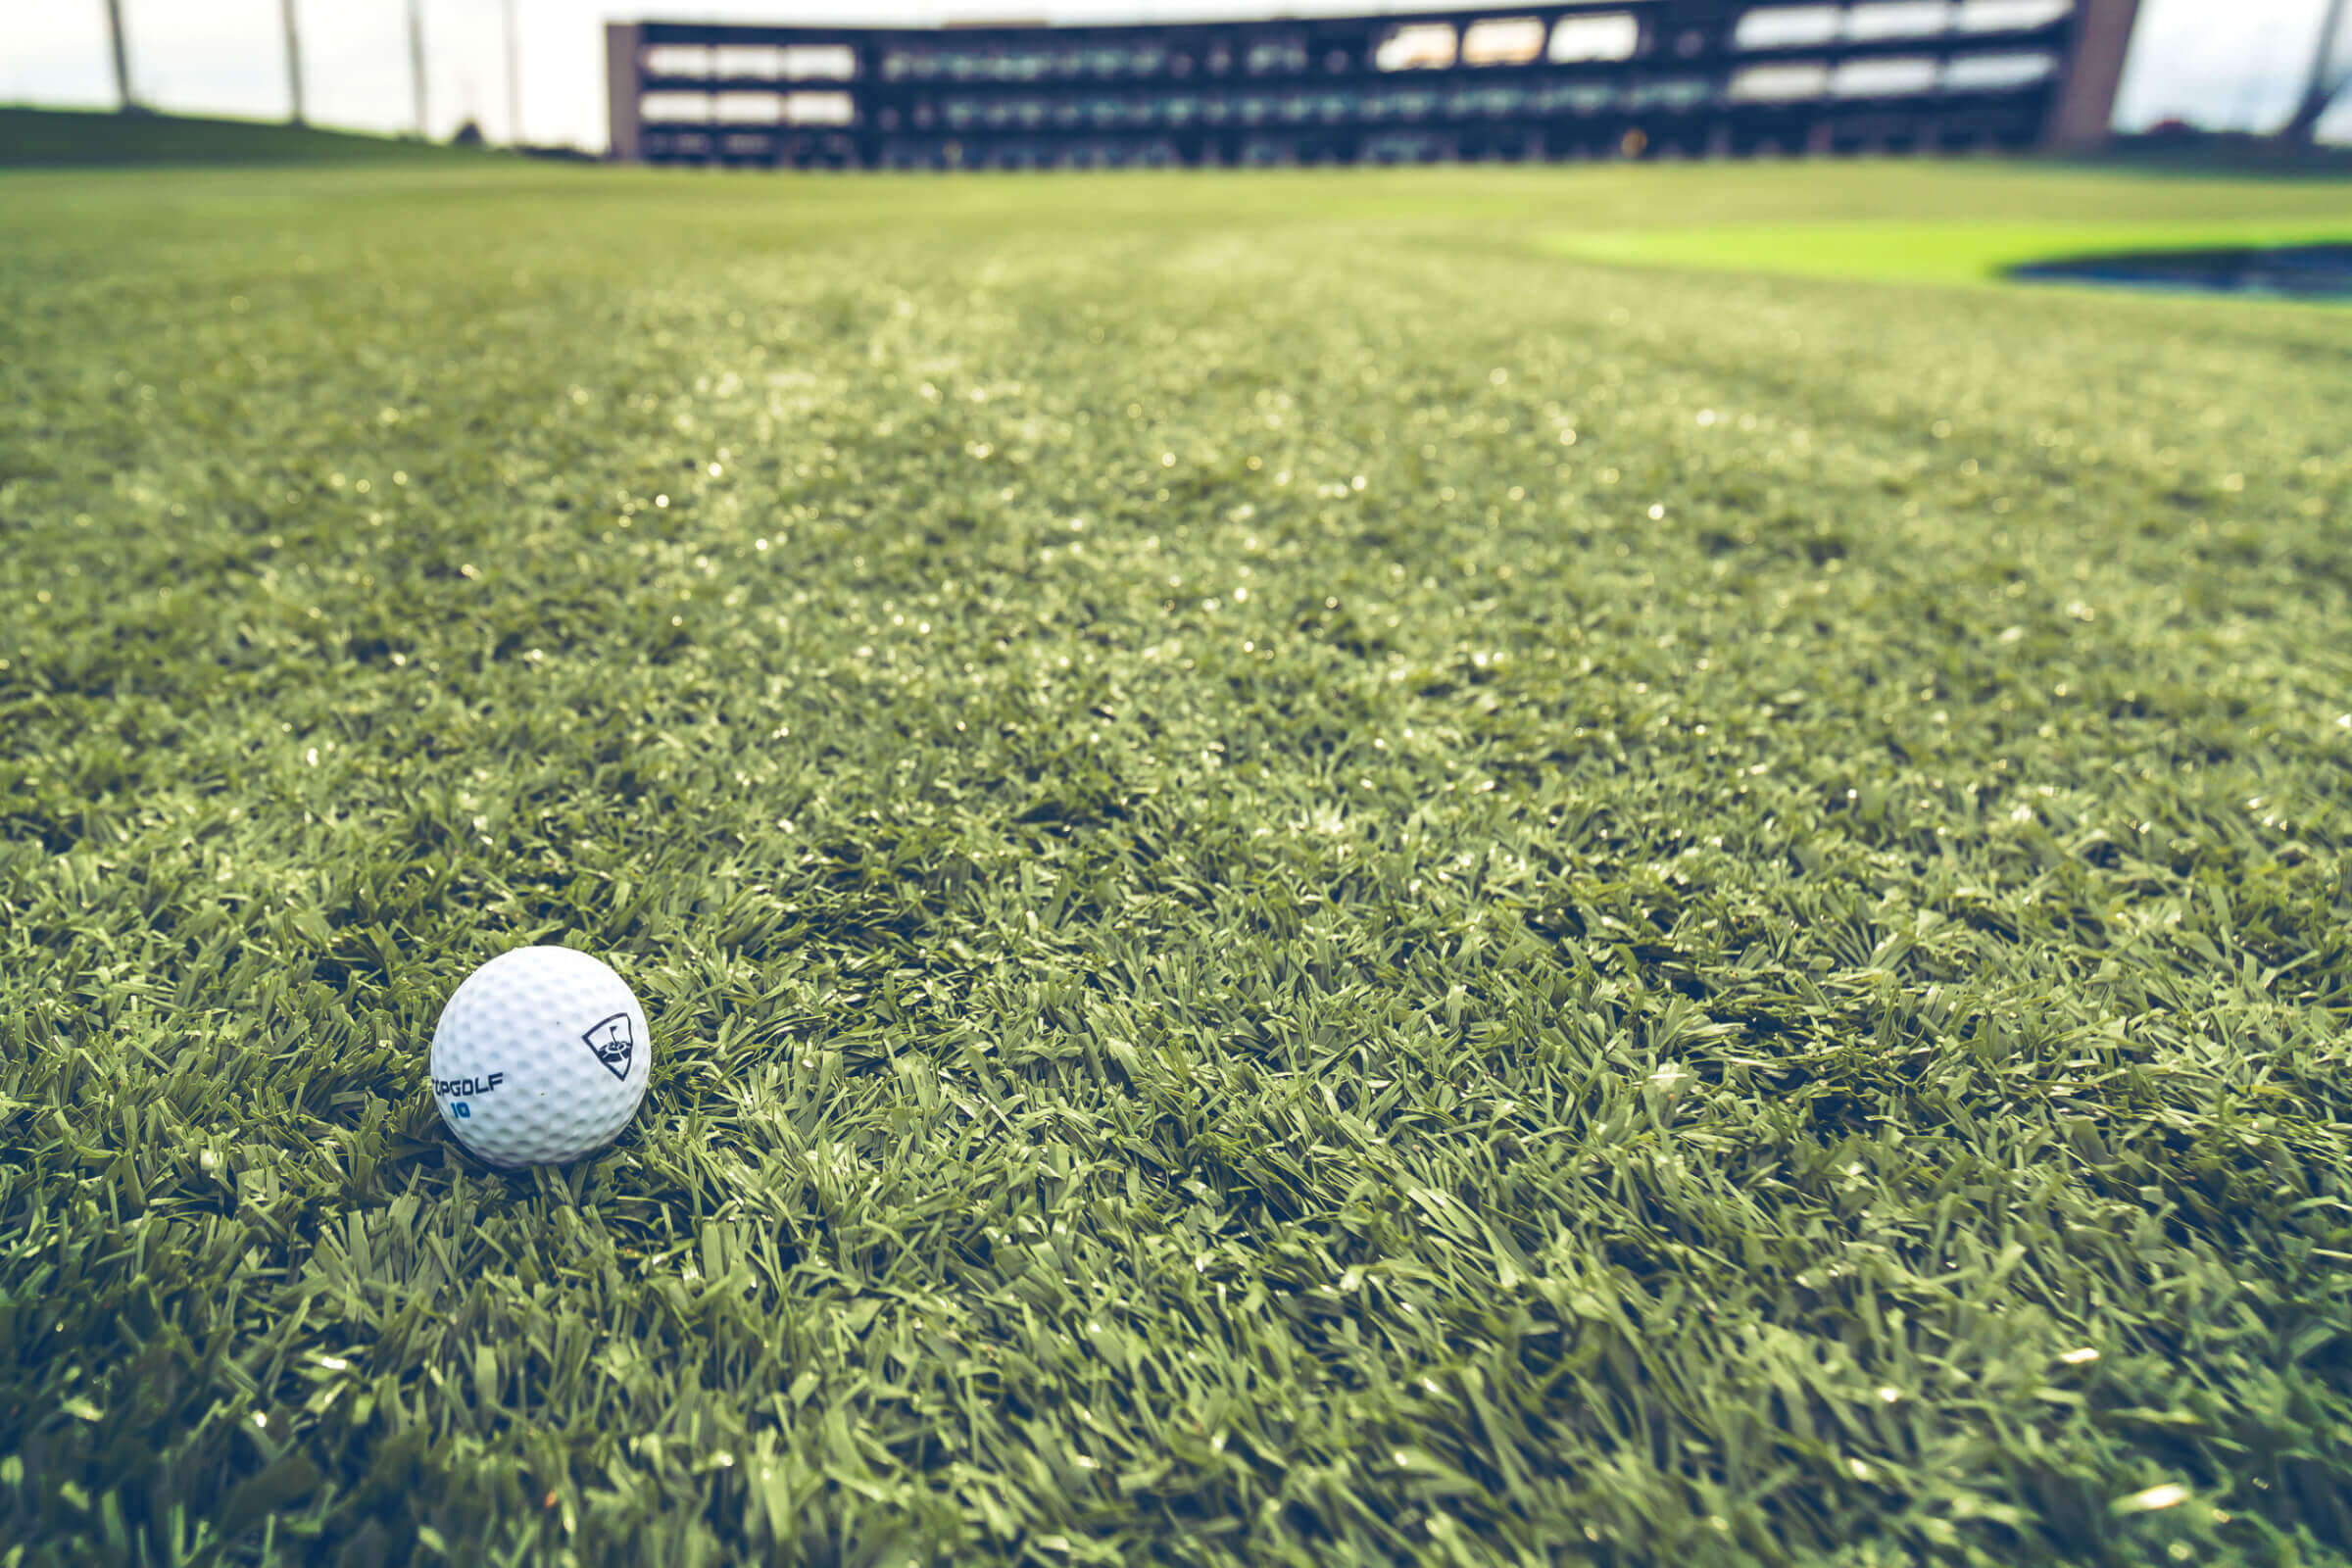 A golf ball sits on the grass in front of a building.